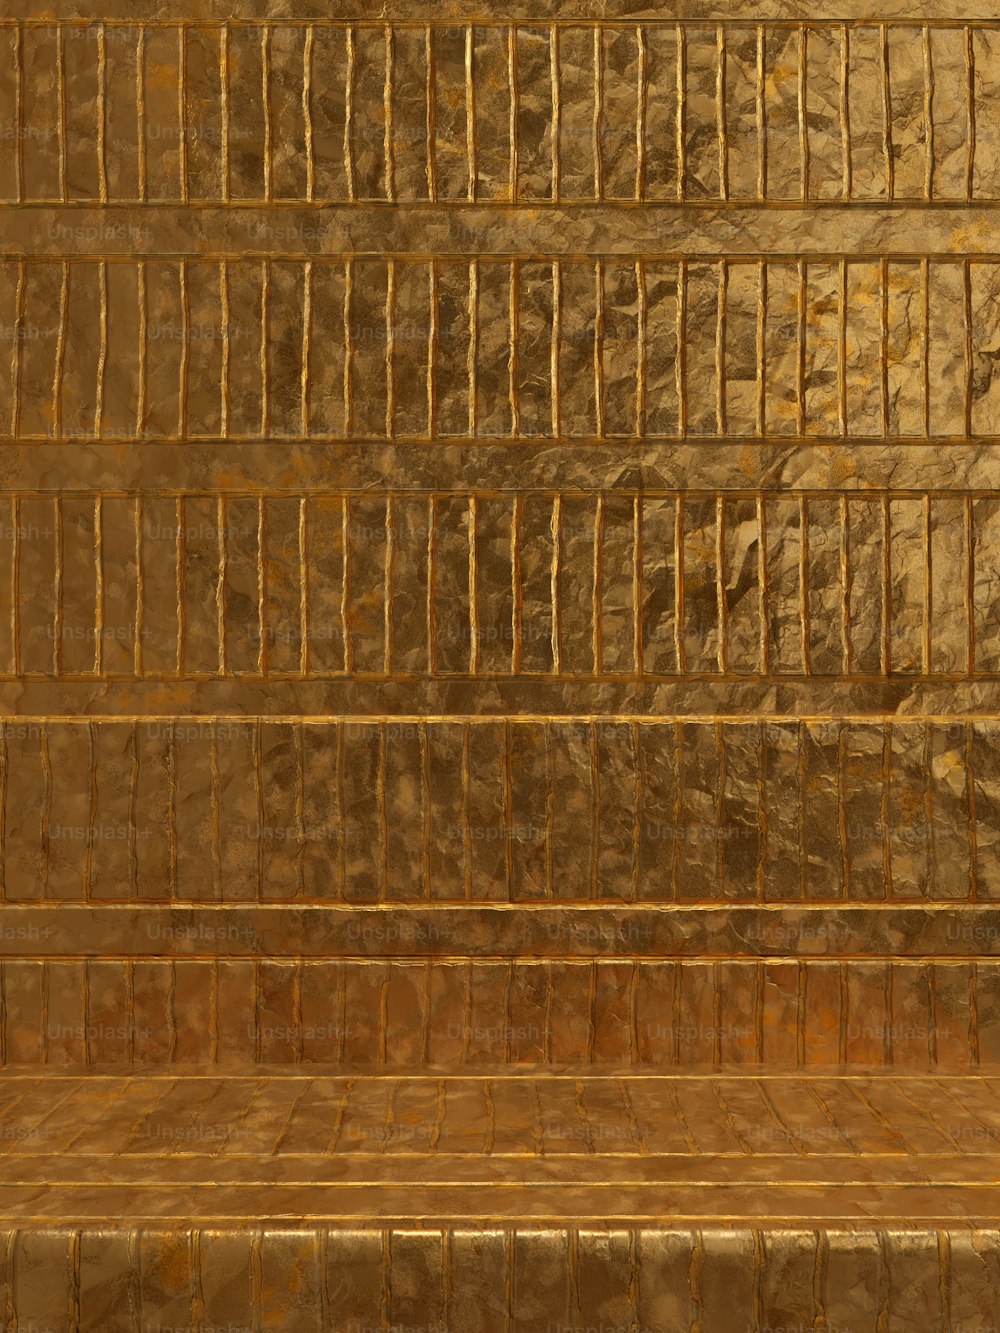 a gold tiled wall with a bench in front of it